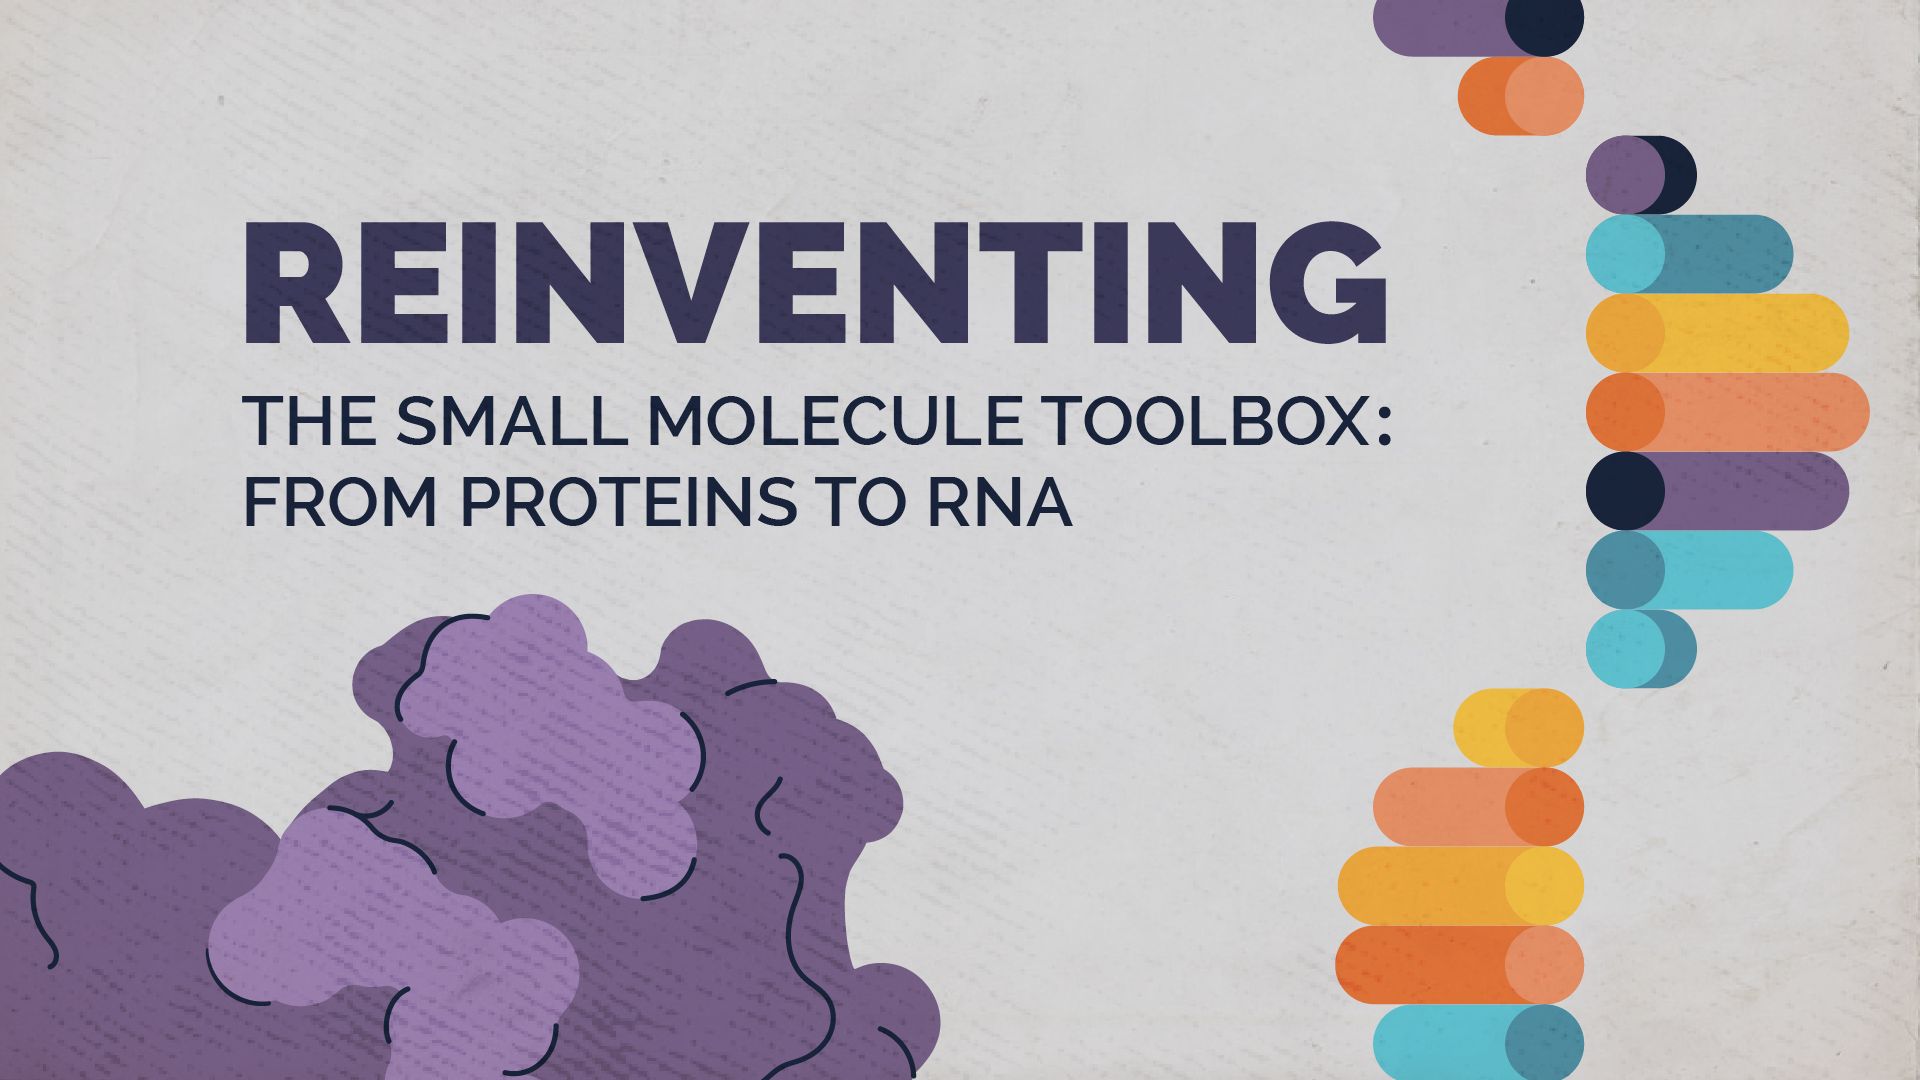 Reinventing the small molecule toolbox: from proteins to RNA